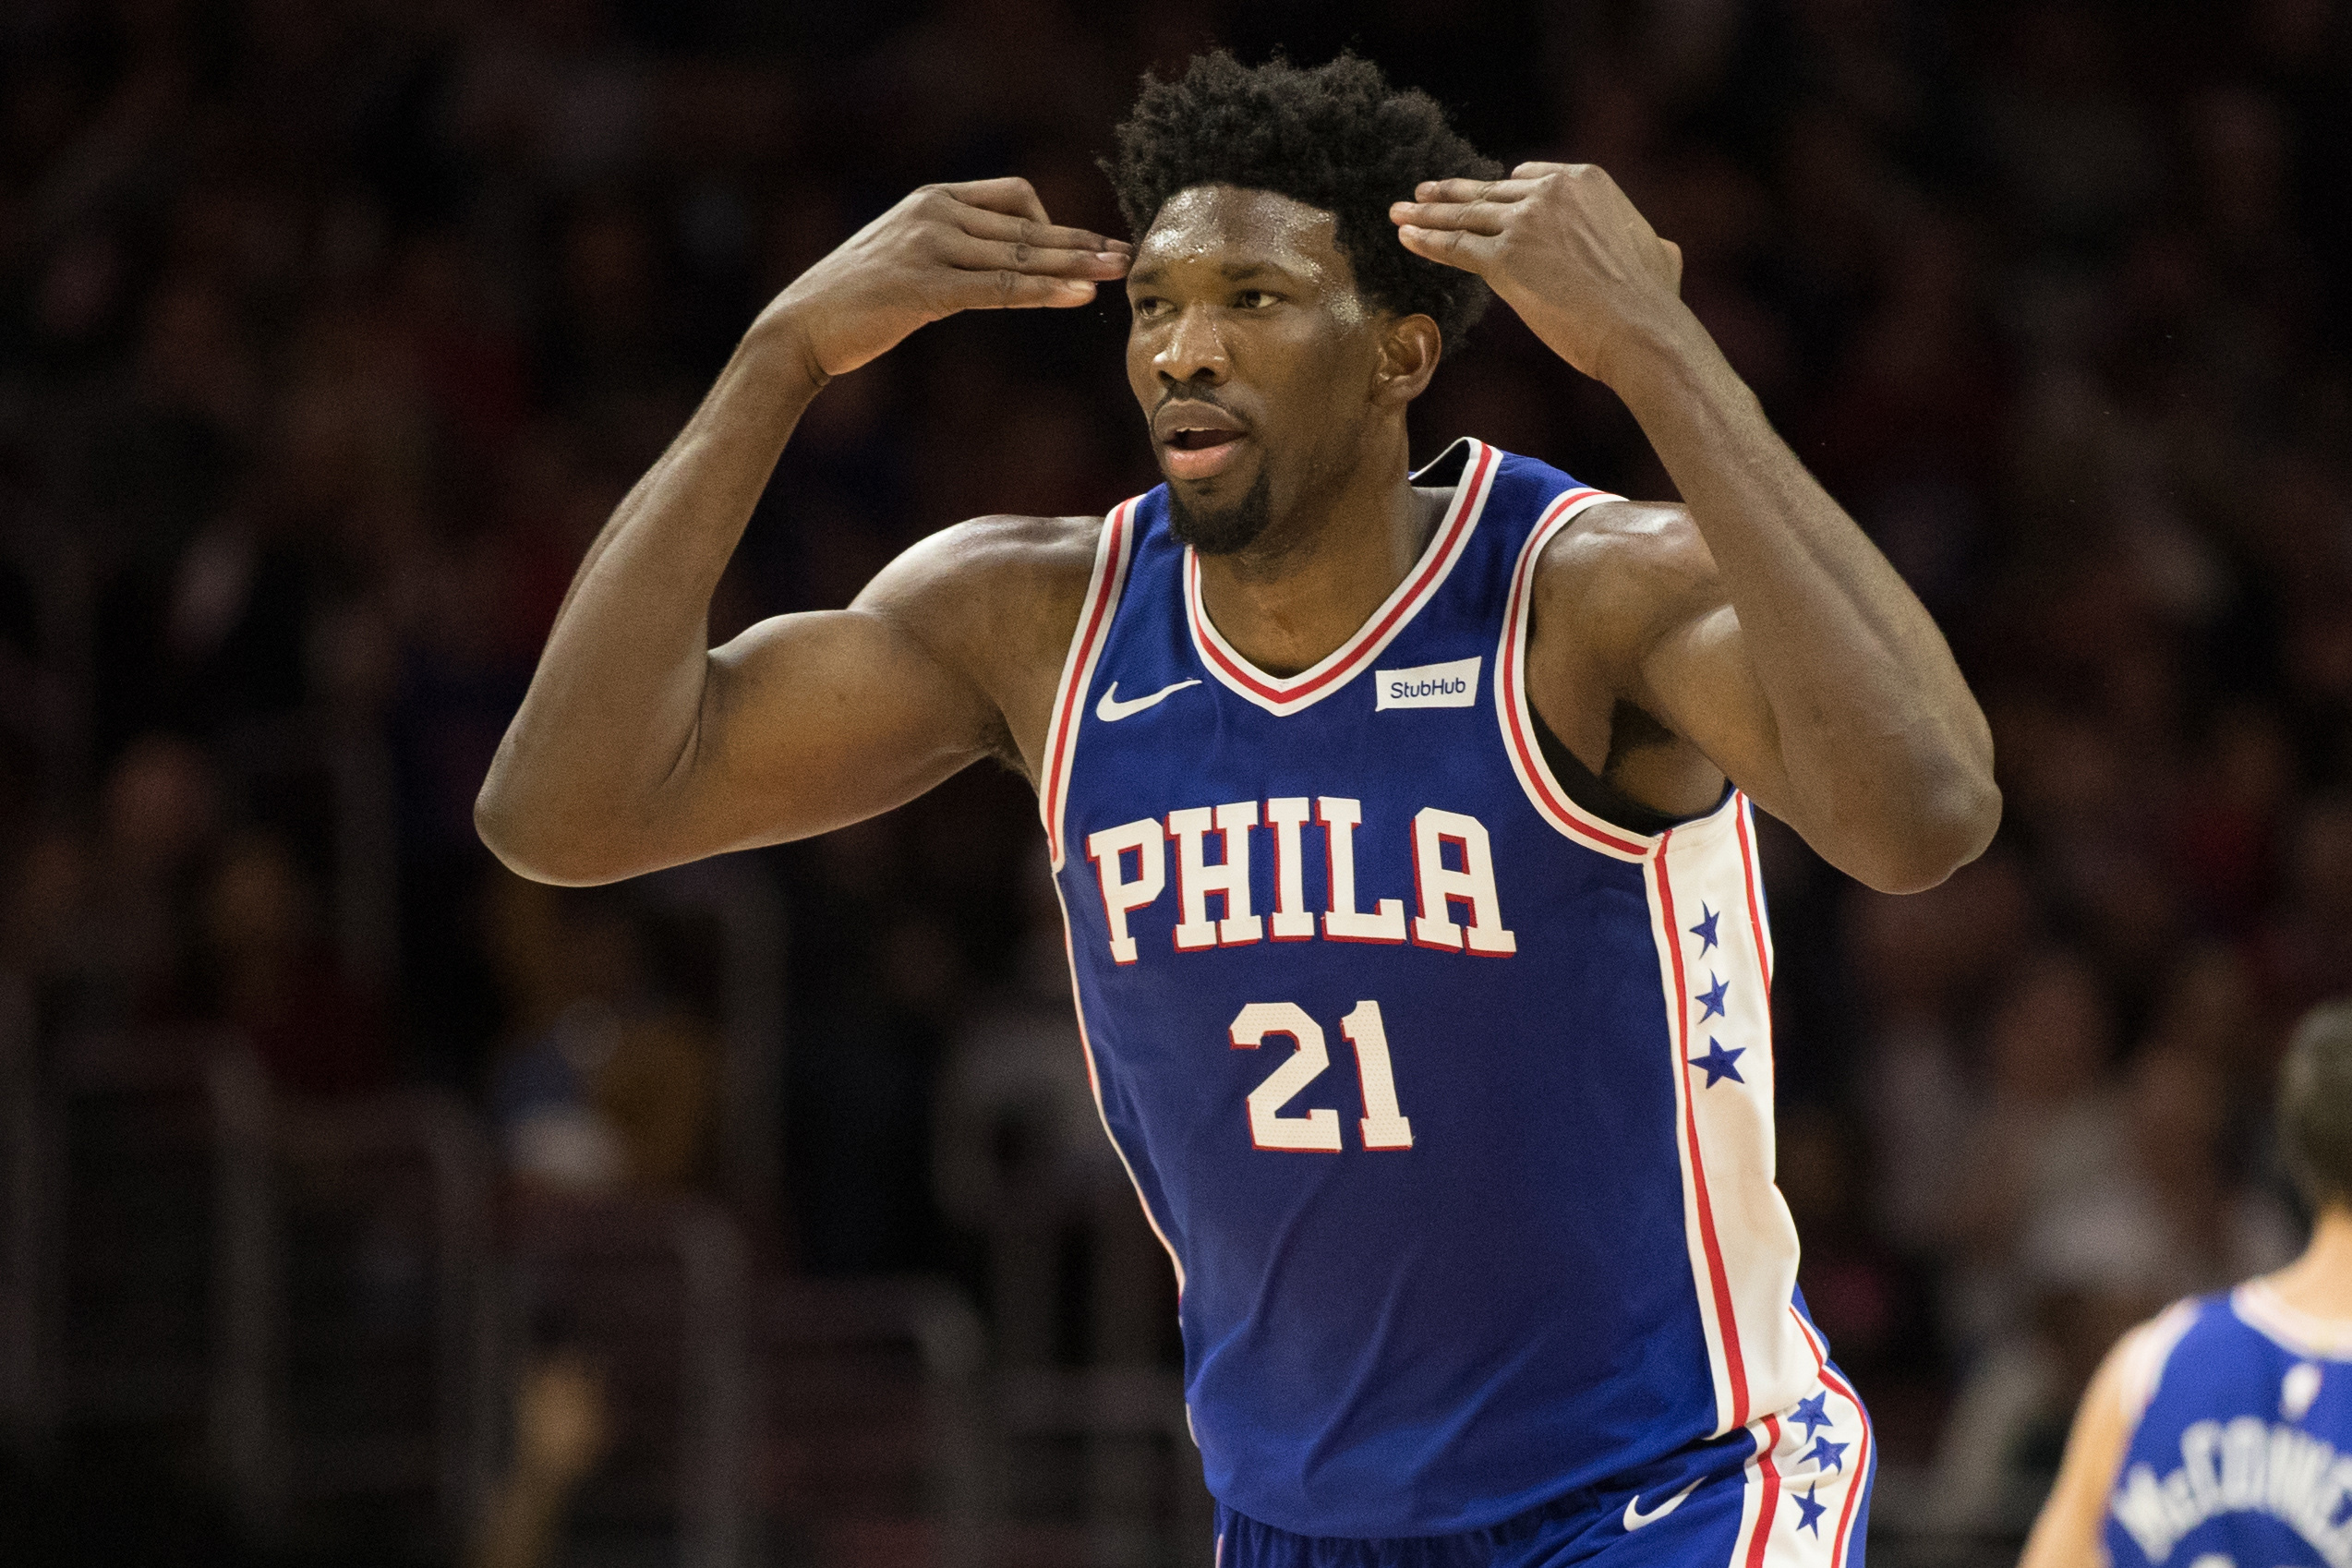 And the Biggest Storyline of the Sixers Season is Now…